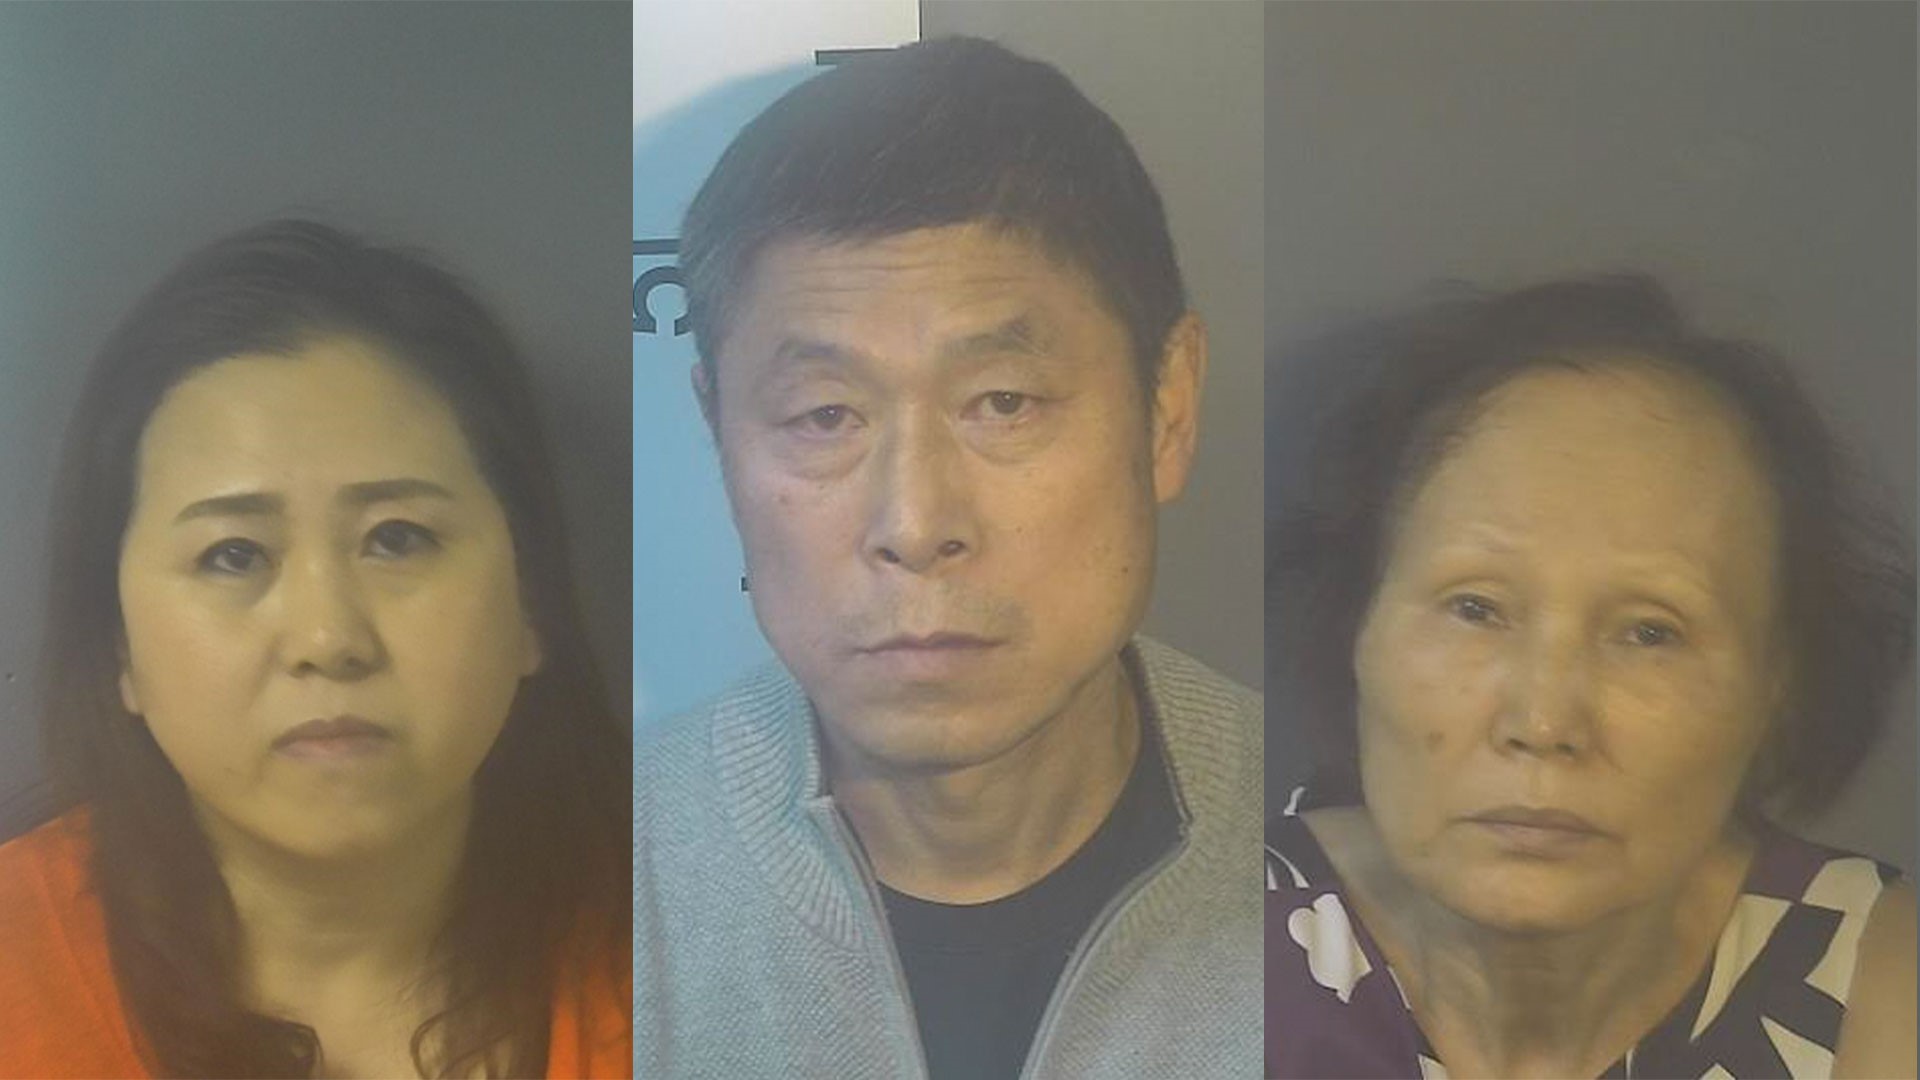 Xxxxnnn Videos Masasage - 3 arrested for human trafficking at Bardstown spas, police say | whas11.com